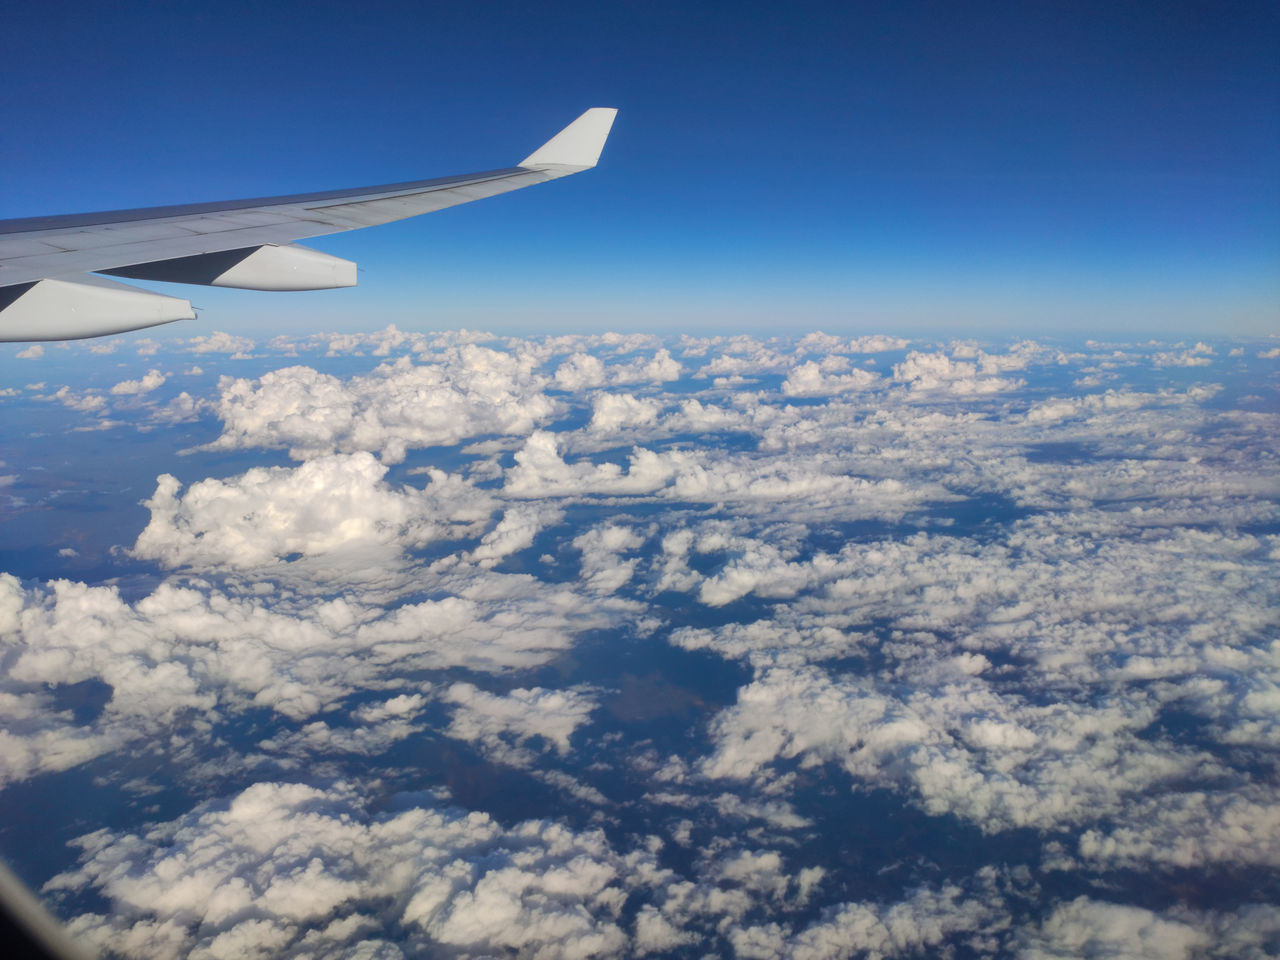 airplane, air vehicle, flying, aircraft wing, aerial view, transportation, sky, mode of transportation, travel, blue, cloud, nature, air travel, vehicle, environment, mid-air, journey, aircraft, scenics - nature, no people, aviation, landscape, day, beauty in nature, on the move, cloudscape, aerial photography, window, outdoors, motion, horizon, wing, vehicle interior, high up, reflection, travel destinations, atmosphere, above, horizon over land, urban skyline